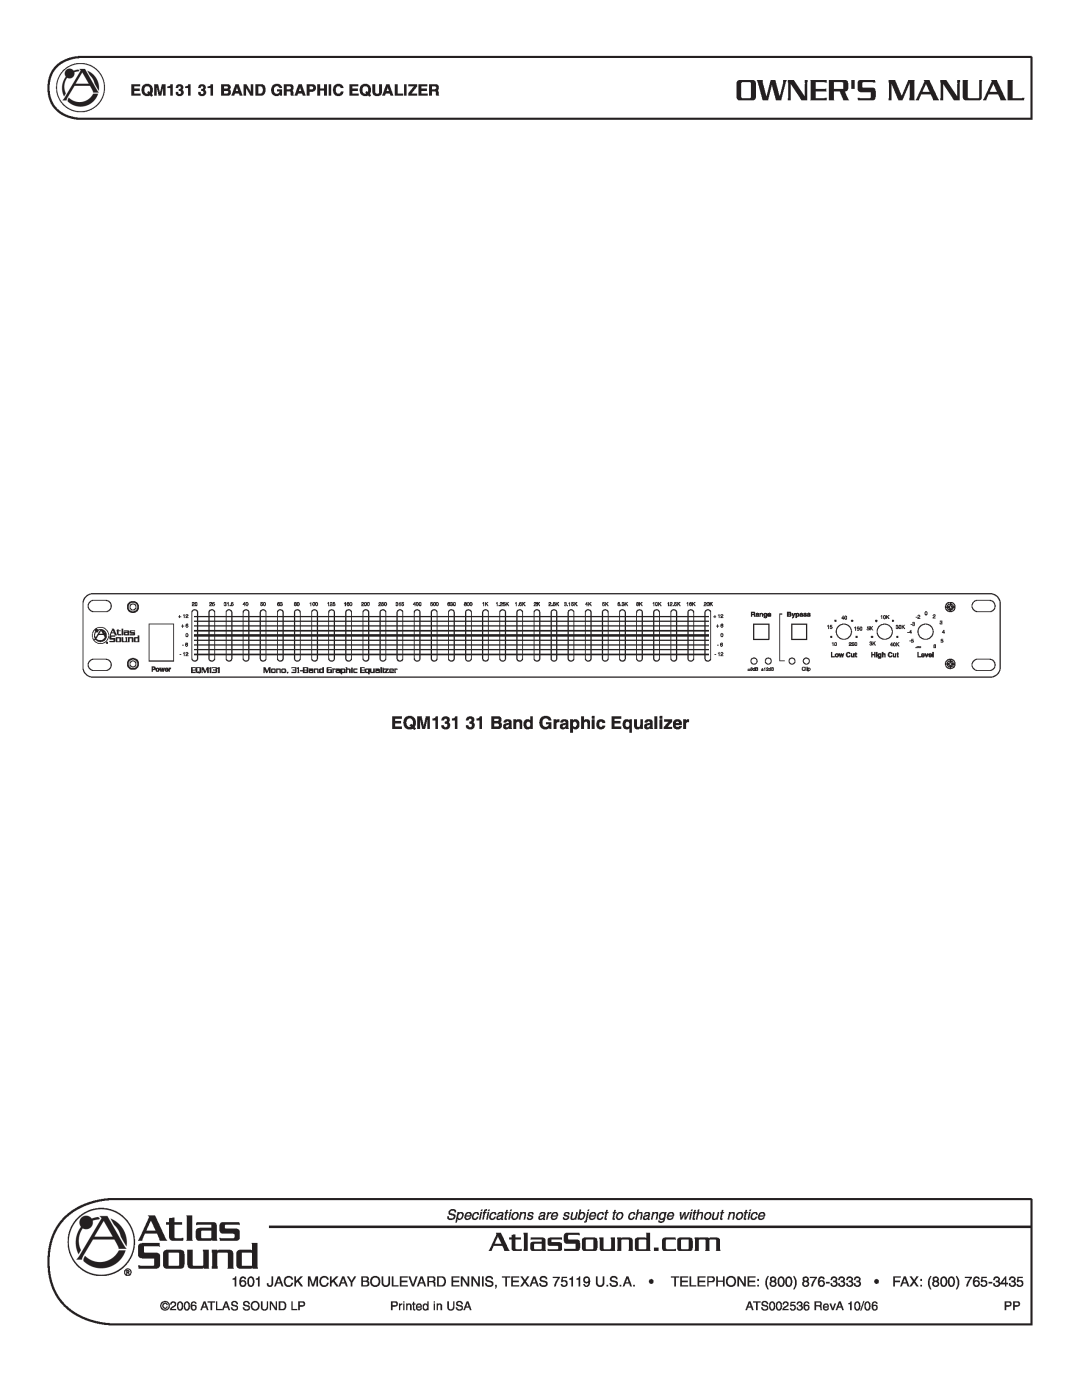 Atlas Sound specifications EQM131 31 Band Graphic Equalizer, EQM131 31 BAND GRAPHIC EQUALIZER 